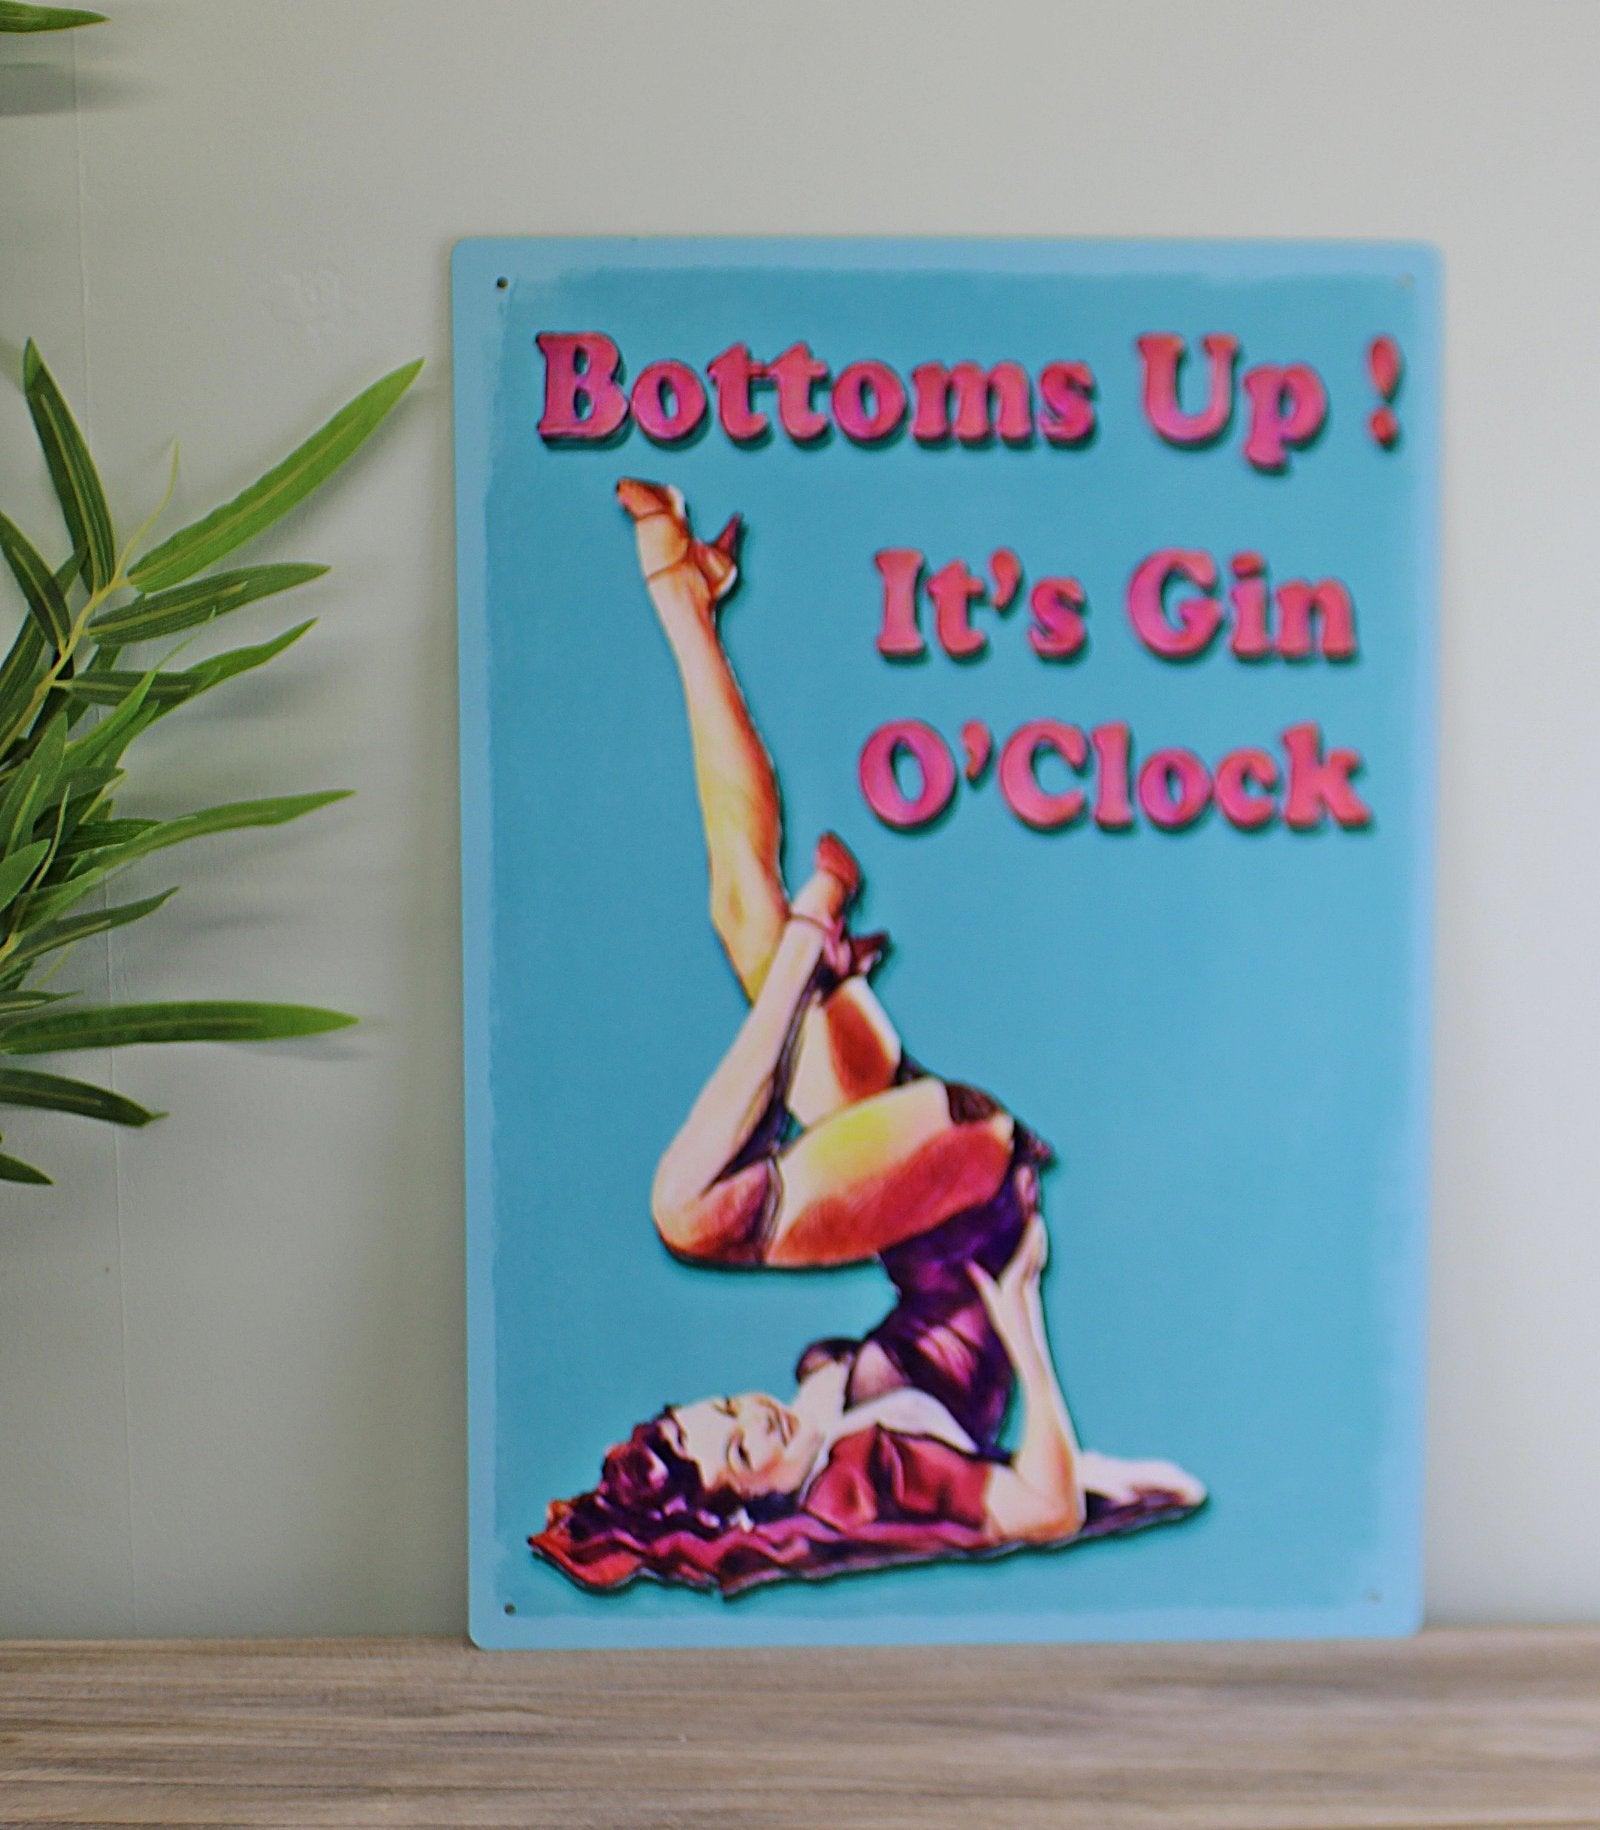 View Vintage Metal Sign Bottoms Up Its Gin OClock information